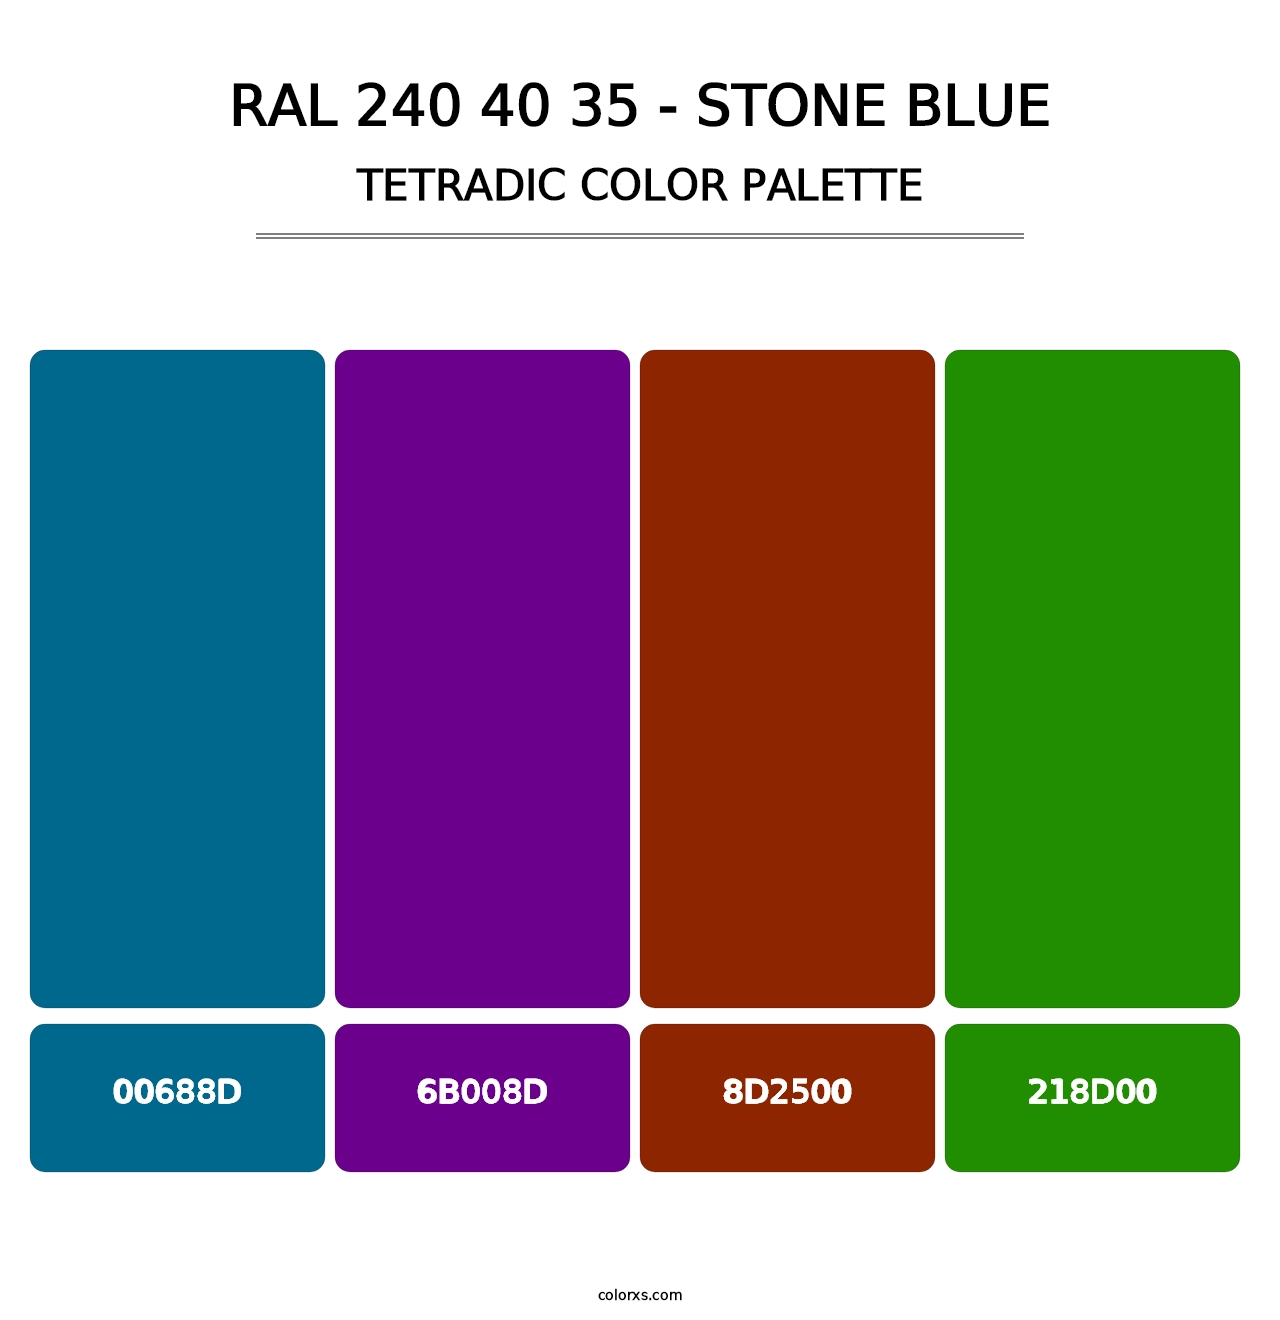 RAL 240 40 35 - Stone Blue - Tetradic Color Palette